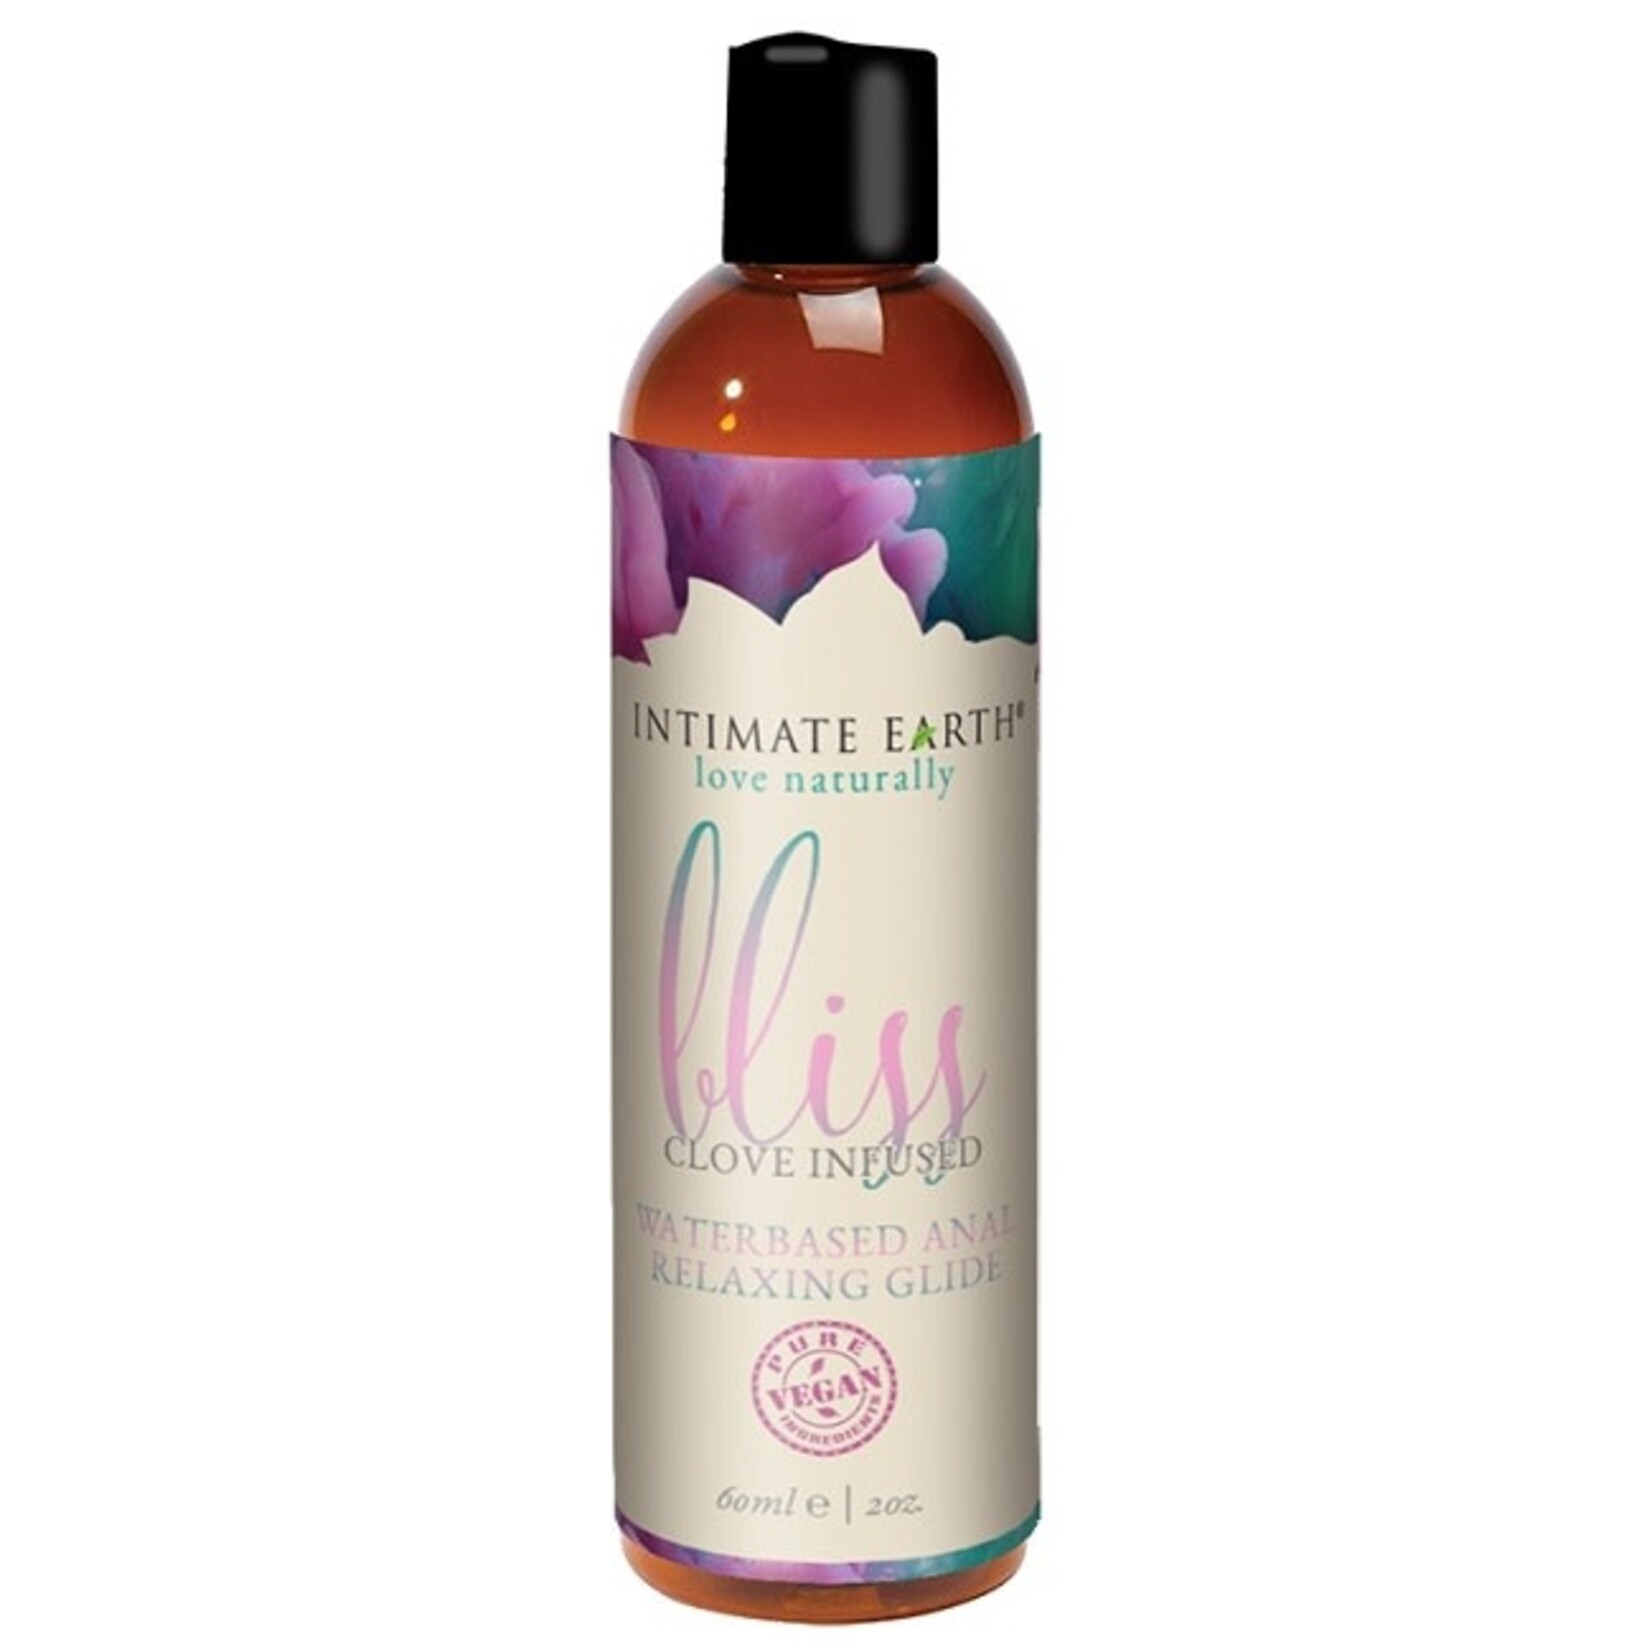 Intimate Earth Intimate Earth Bliss Clove Infused Anal Glide 2oz